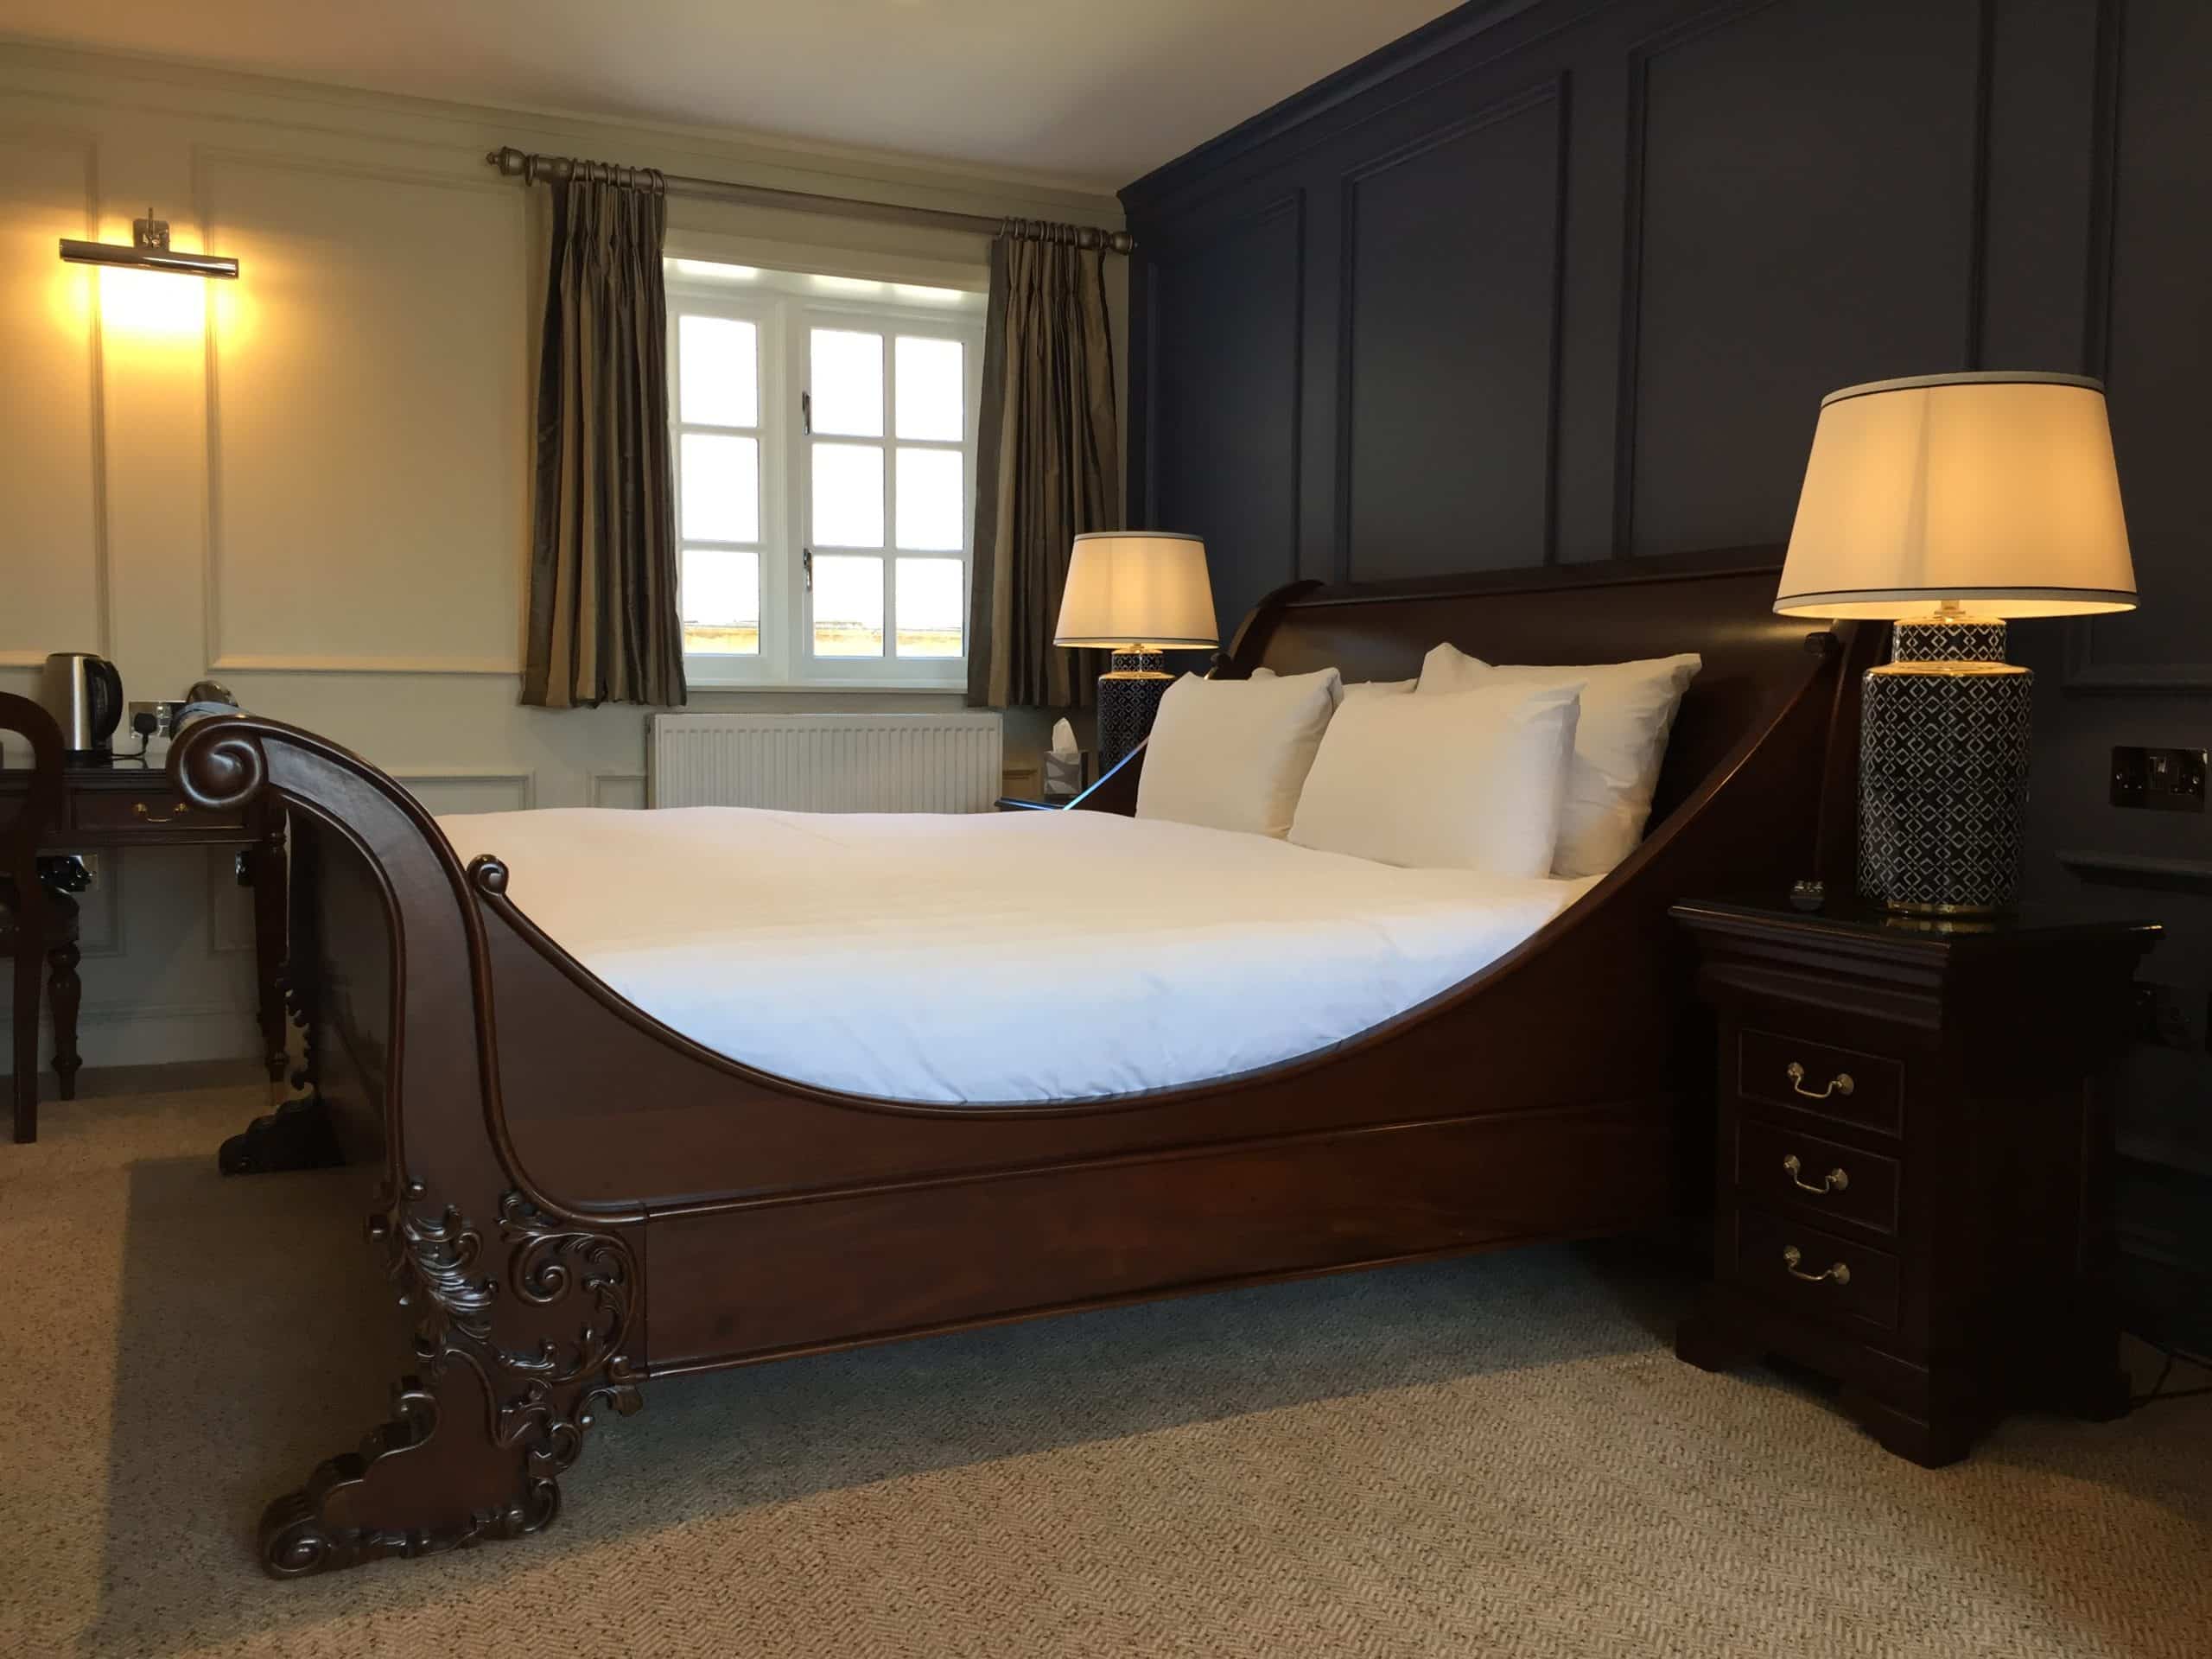 Suite in Carriage House, Wrea Head Hall Hotel